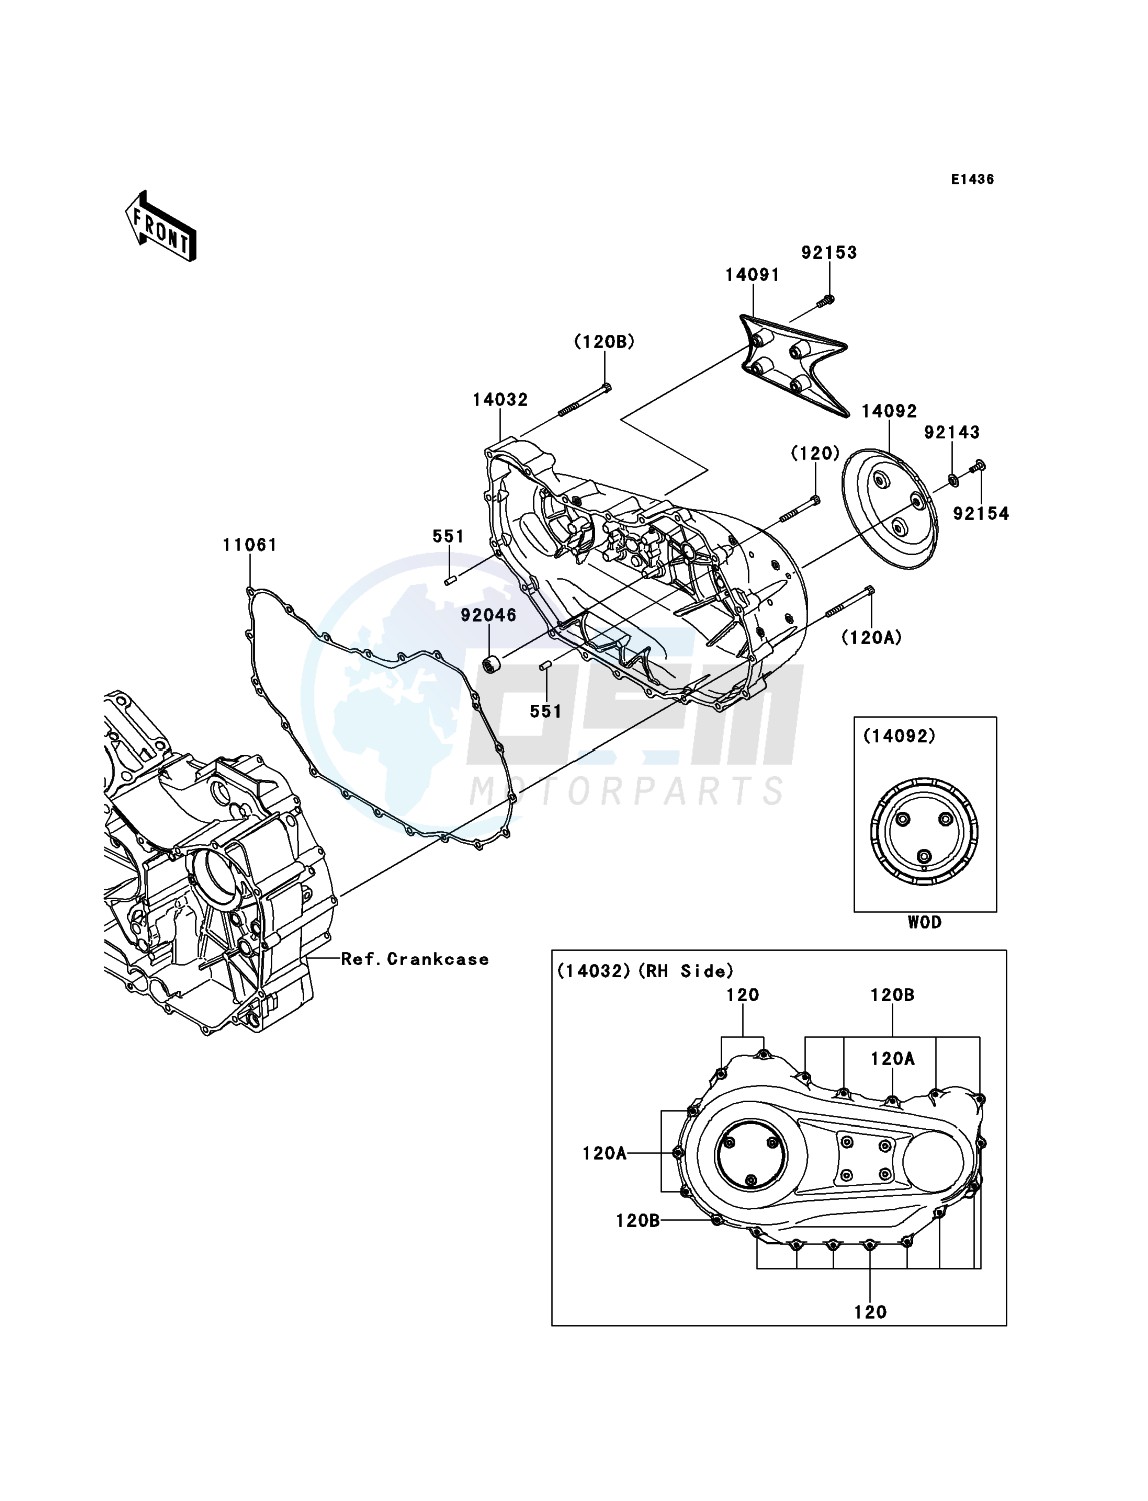 Right Engine Cover(s) blueprint